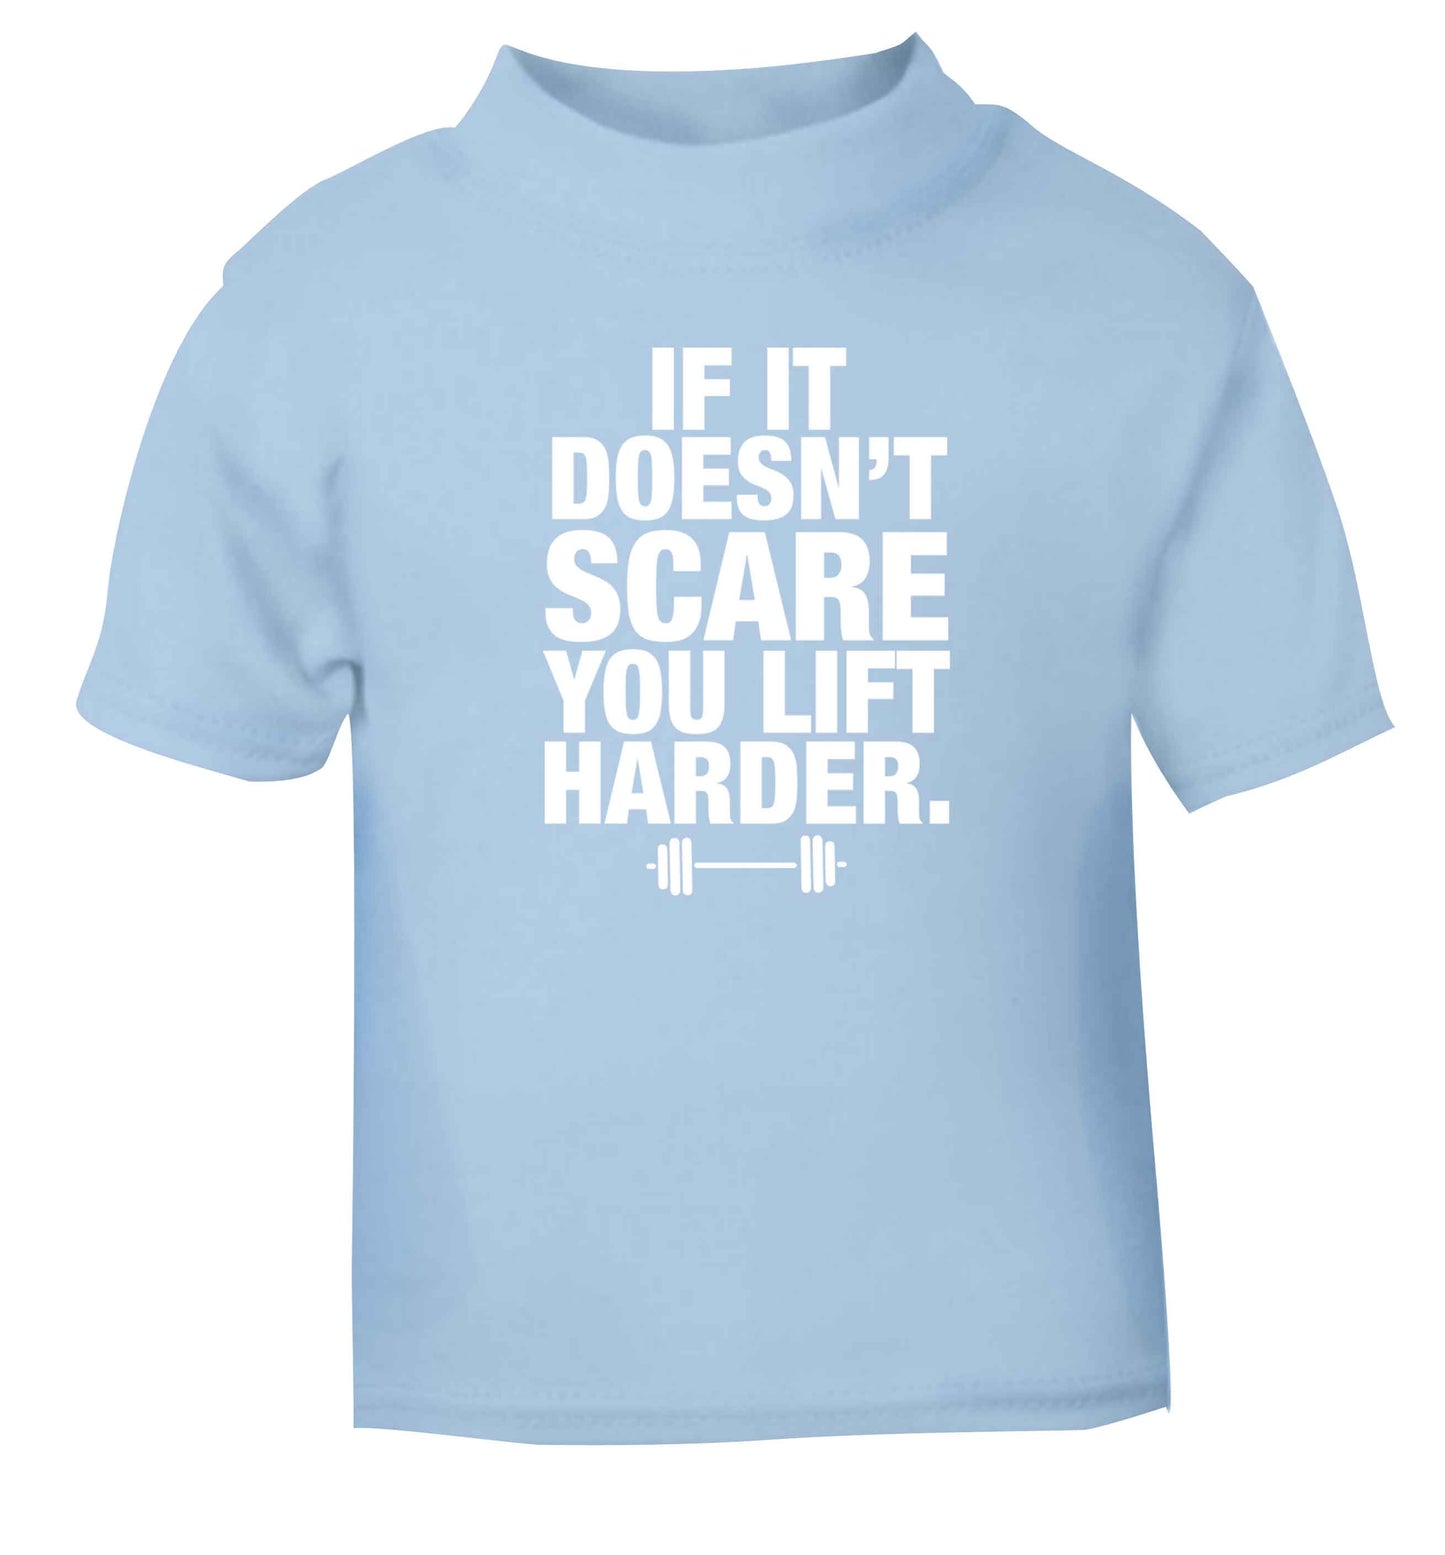 If it doesnt' scare you lift harder light blue Baby Toddler Tshirt 2 Years